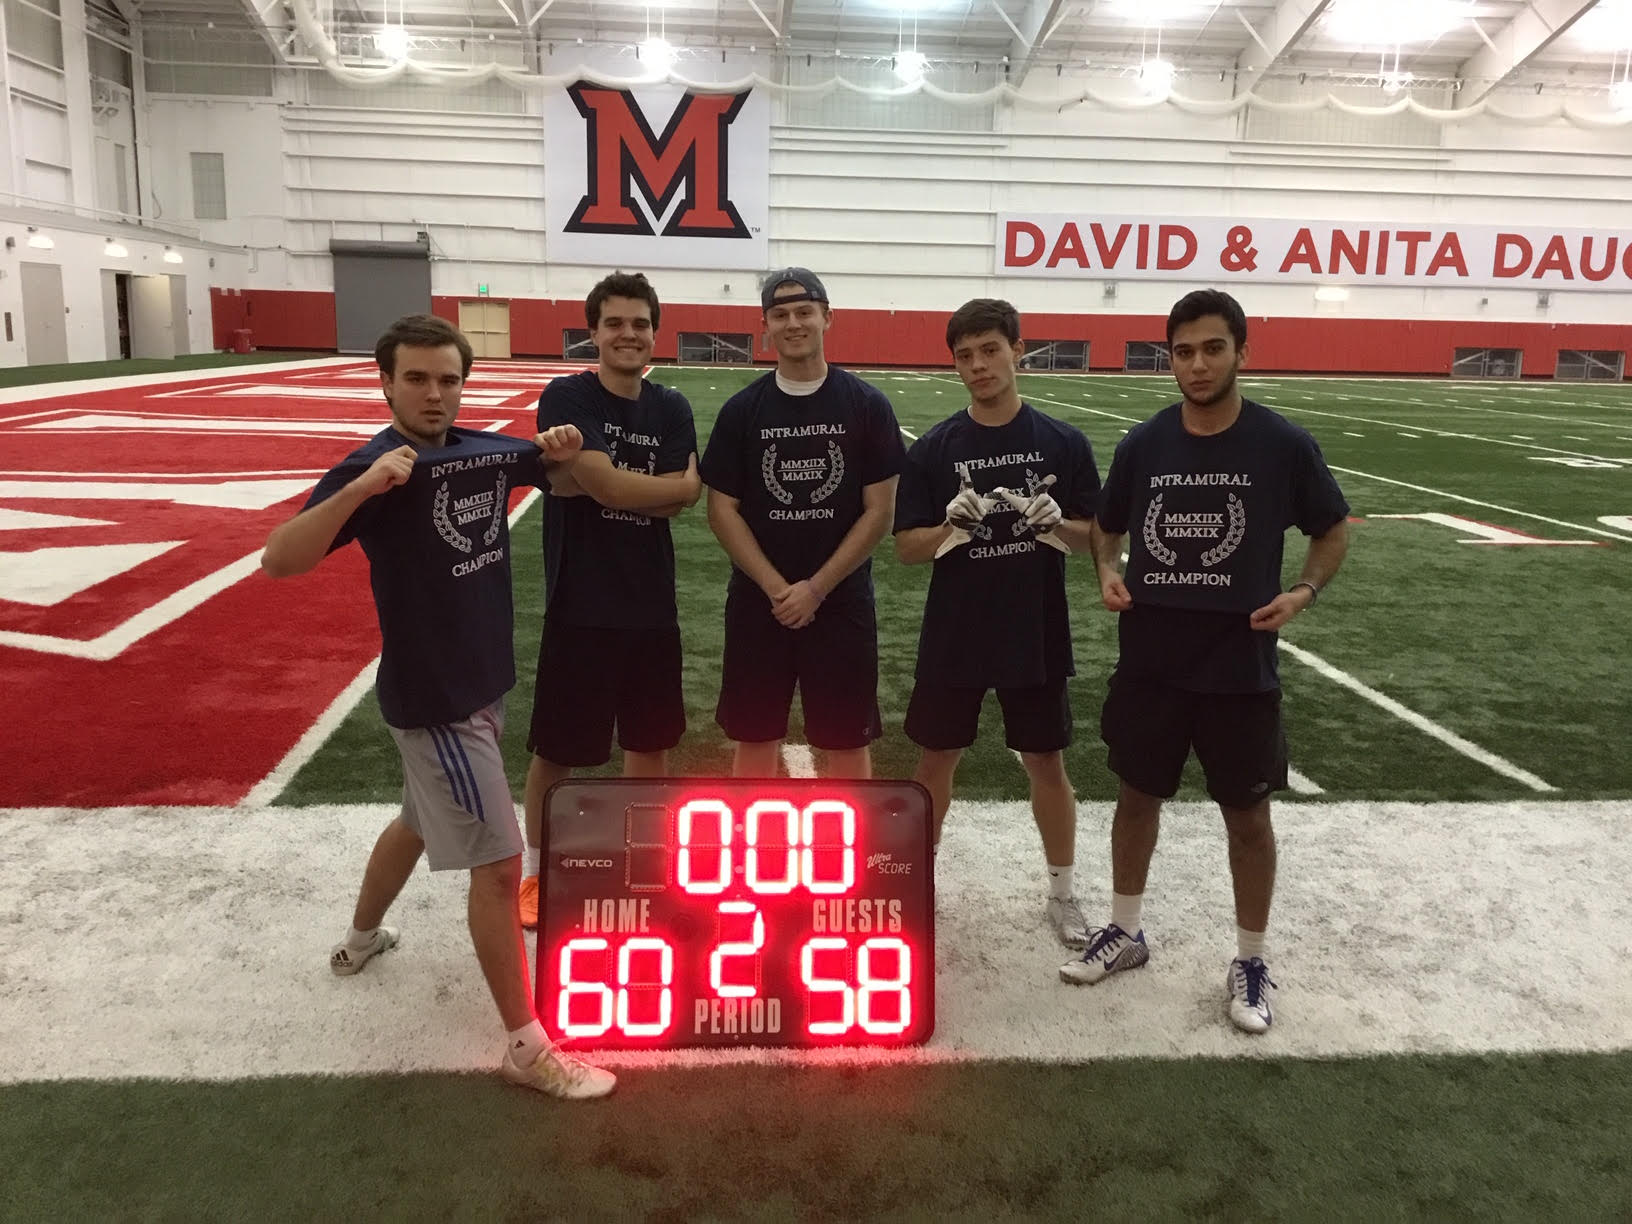 Arena Football champions pose on the indoor field wearing their Intramural Champions shirts.